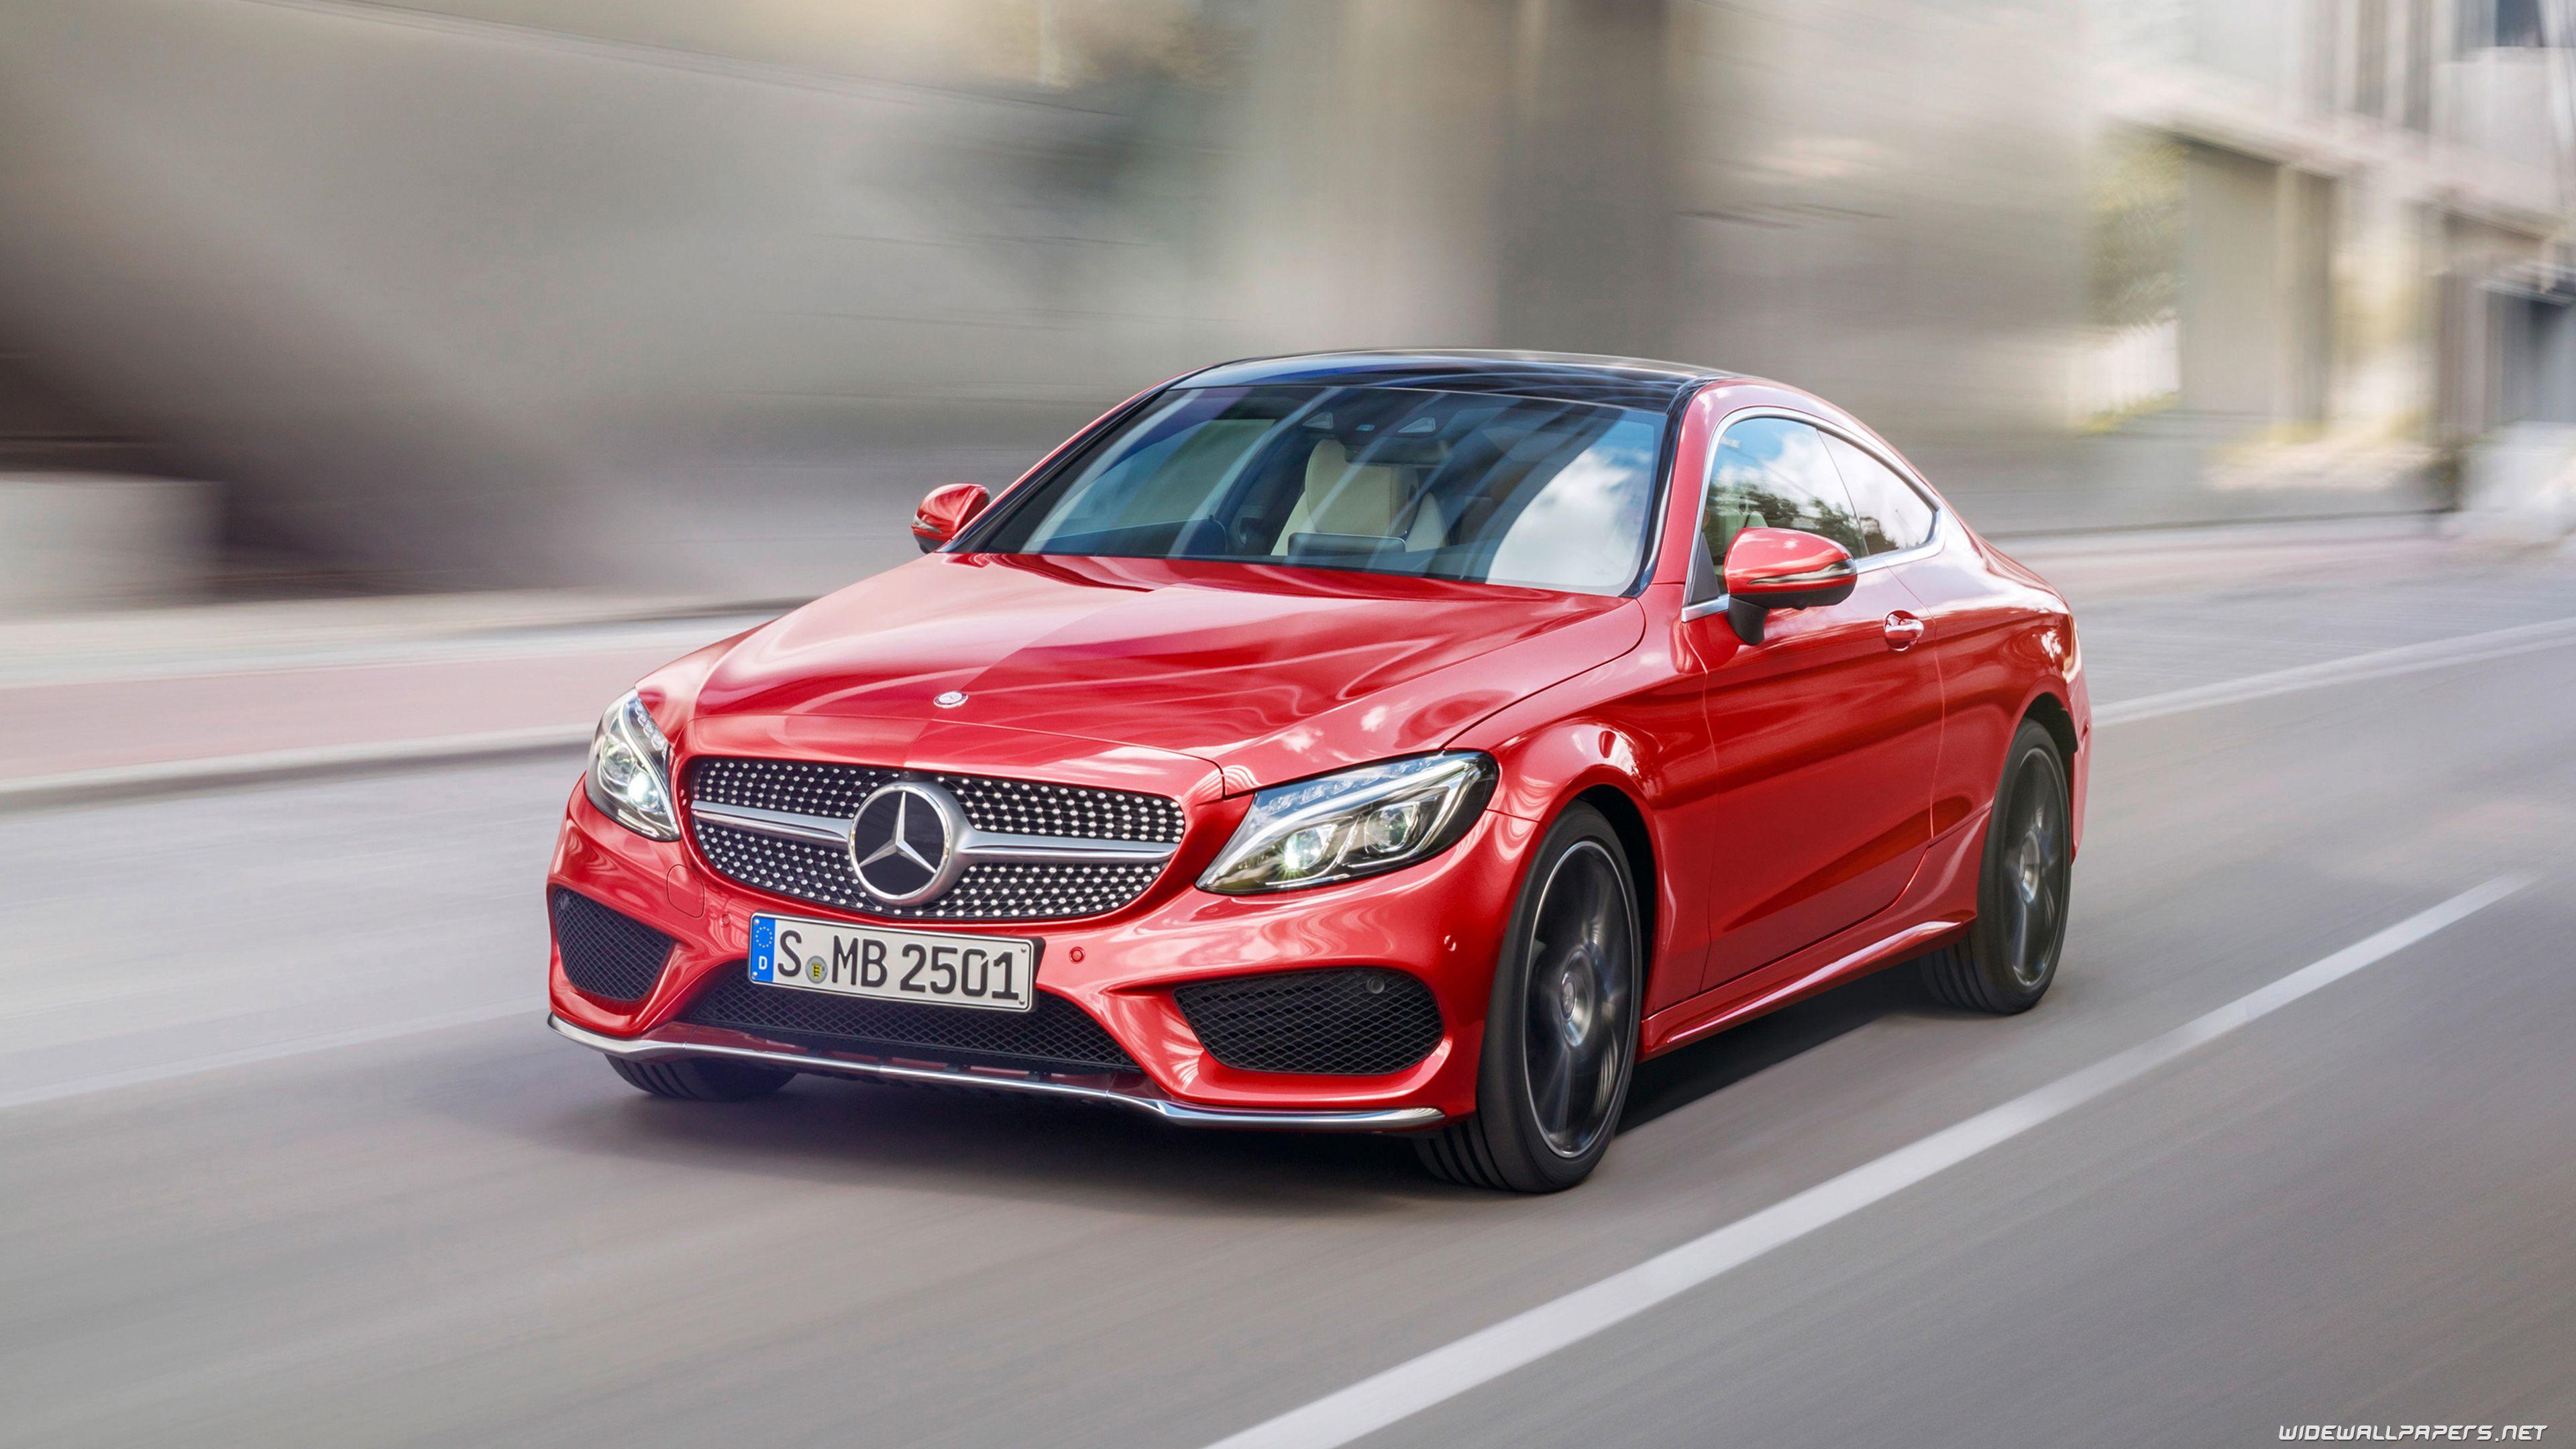 Mercedes Benz Clase C Wallpapers Top Free Mercedes Benz Clase C Backgrounds Wallpaperaccess